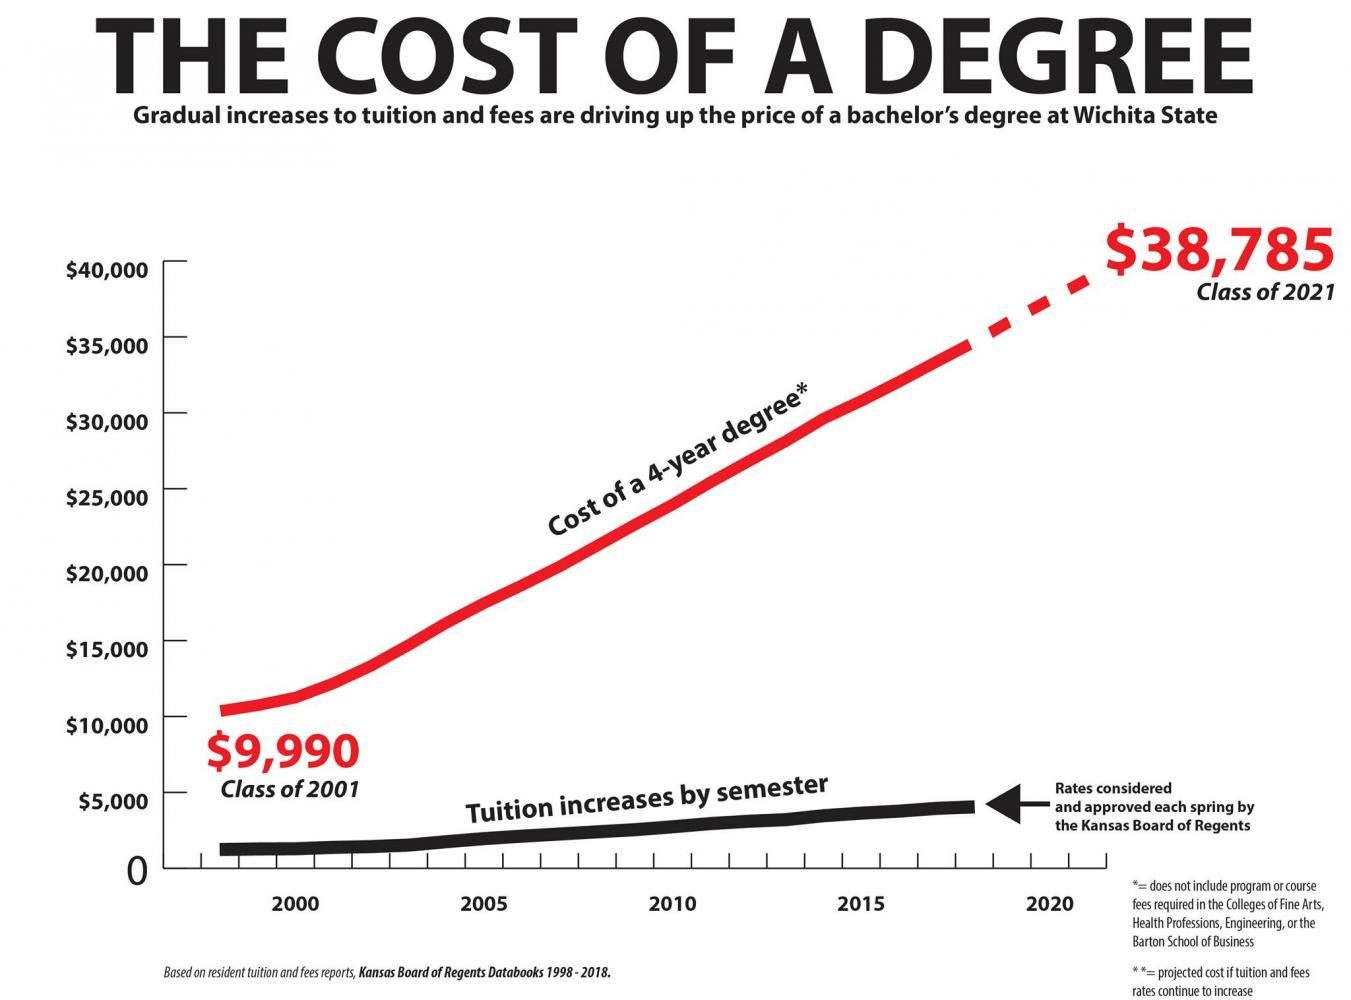 The+cost+of+a+degree+at+Wichita+State+continues+to+climb%2C+tuition+and+fees+increase